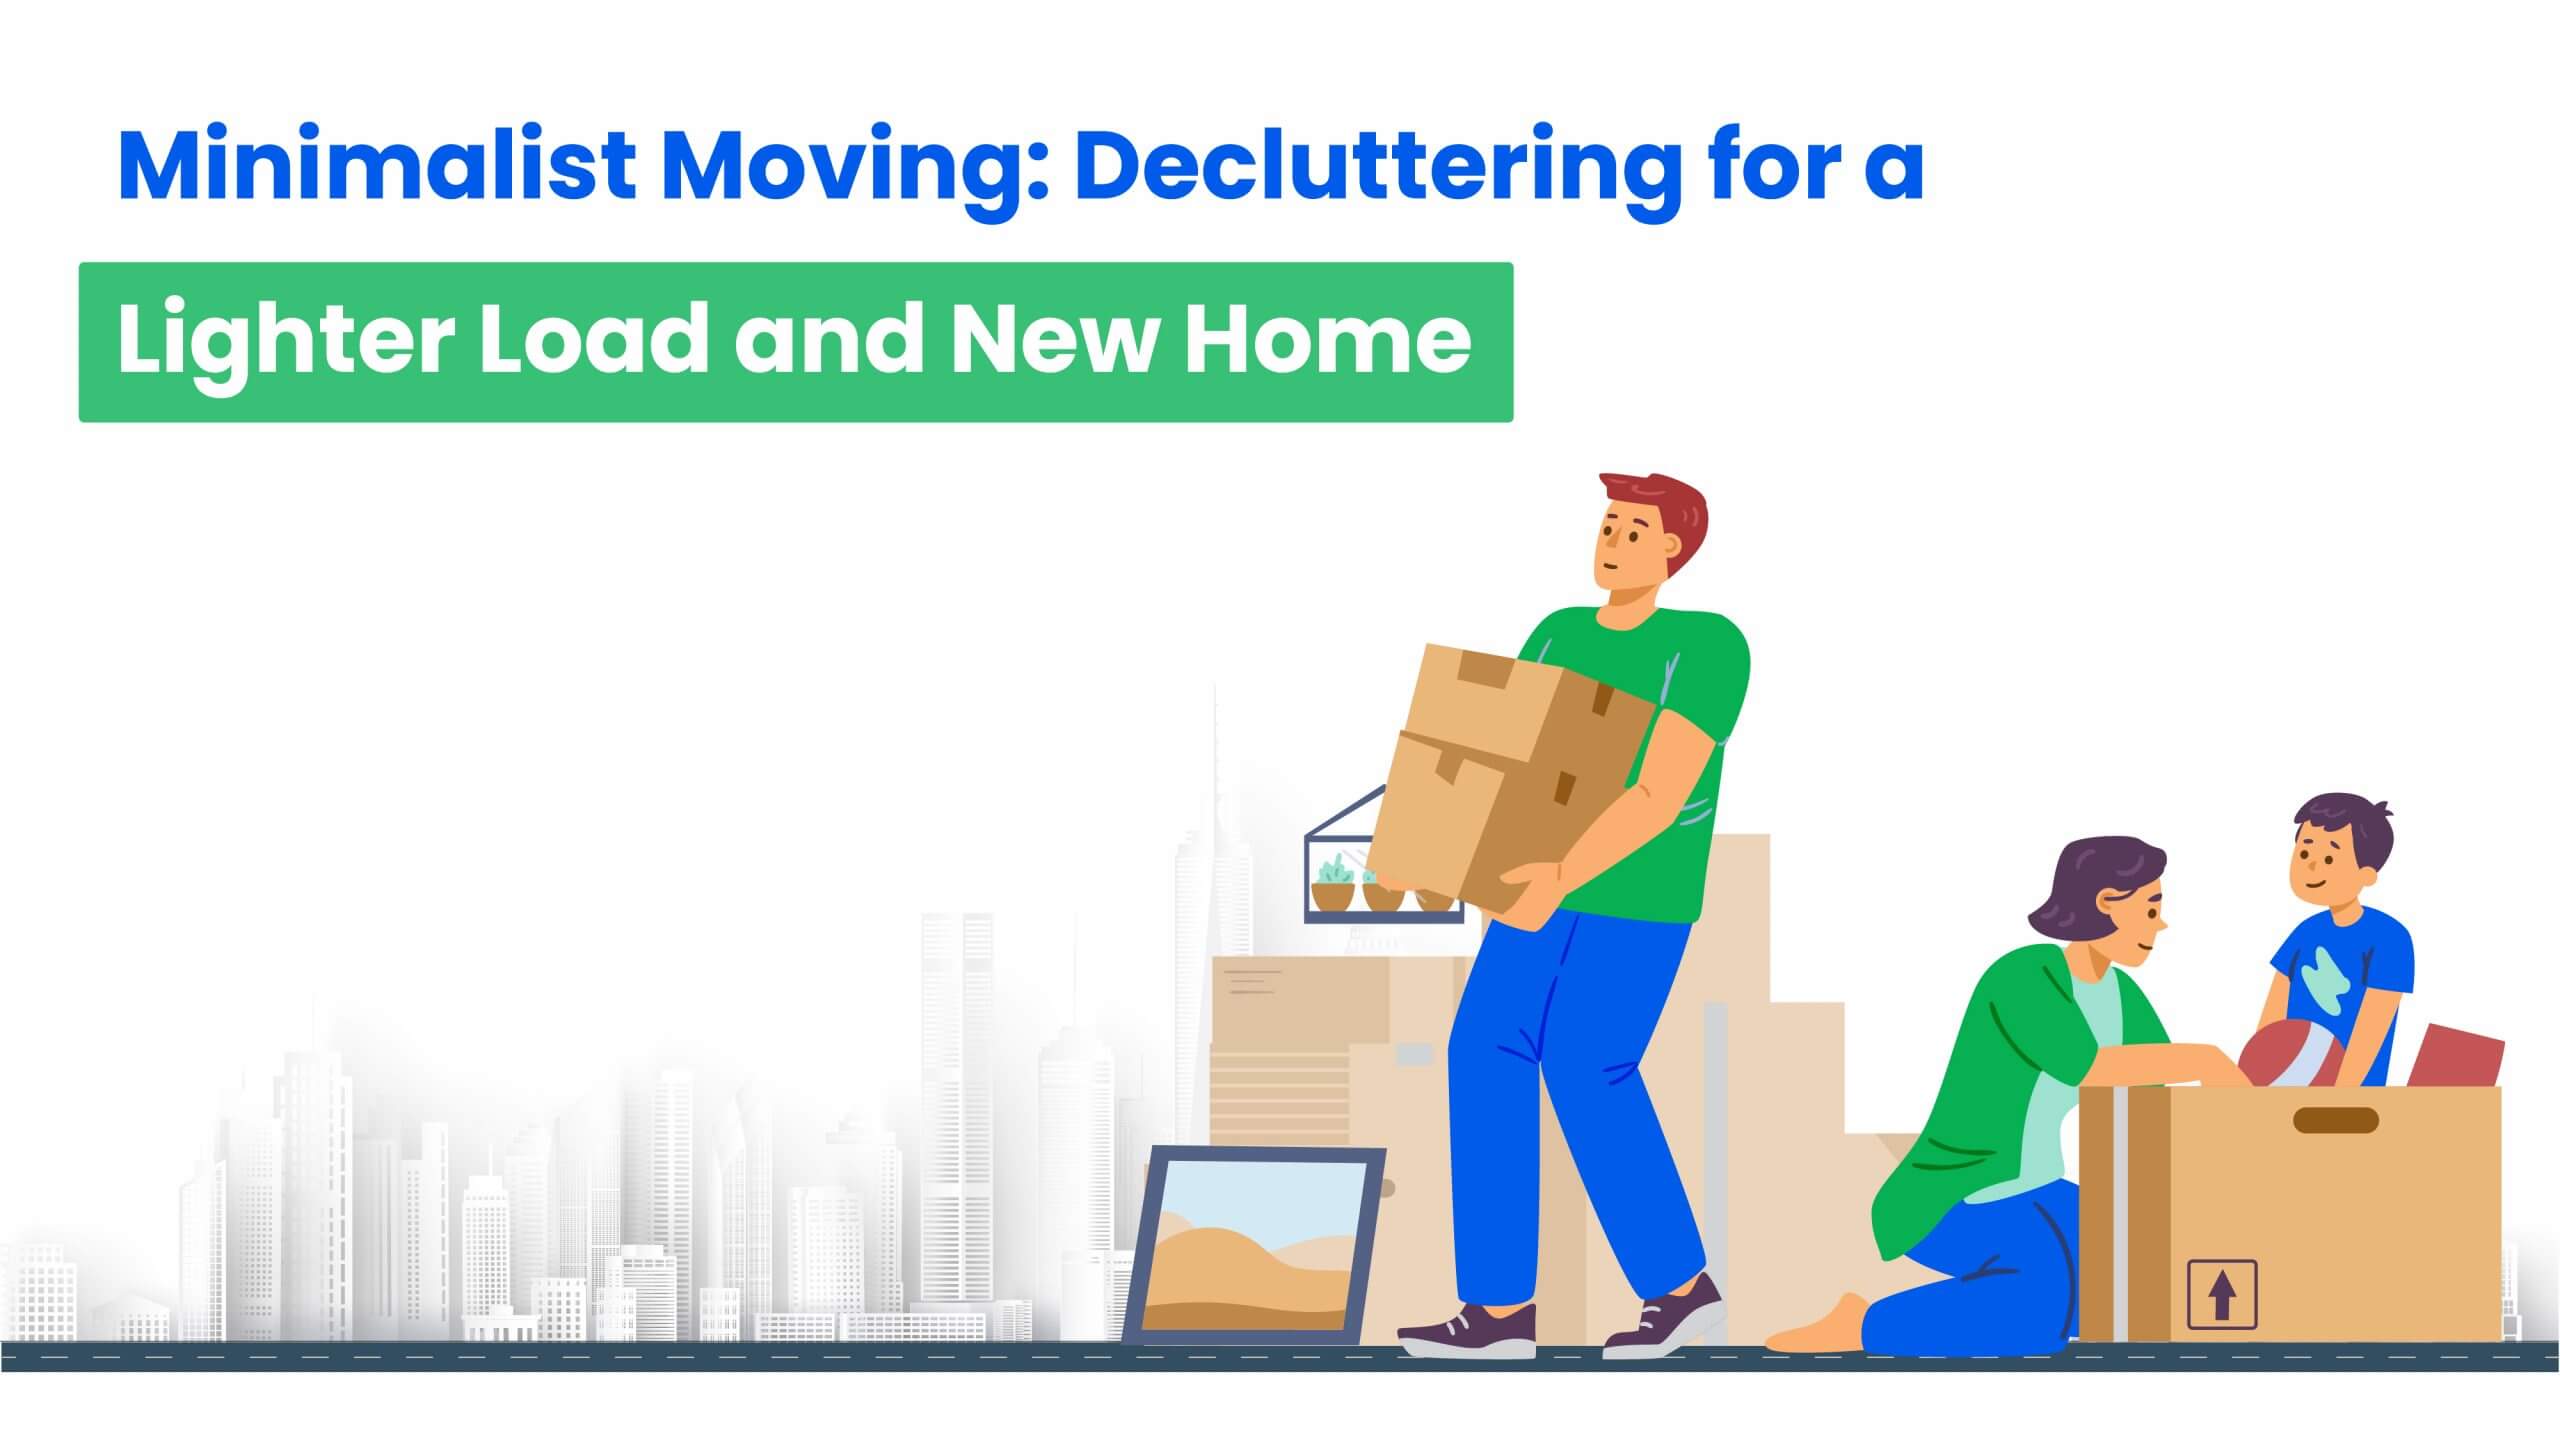 Minimalist moving decluttering for a lighter load and new home 01